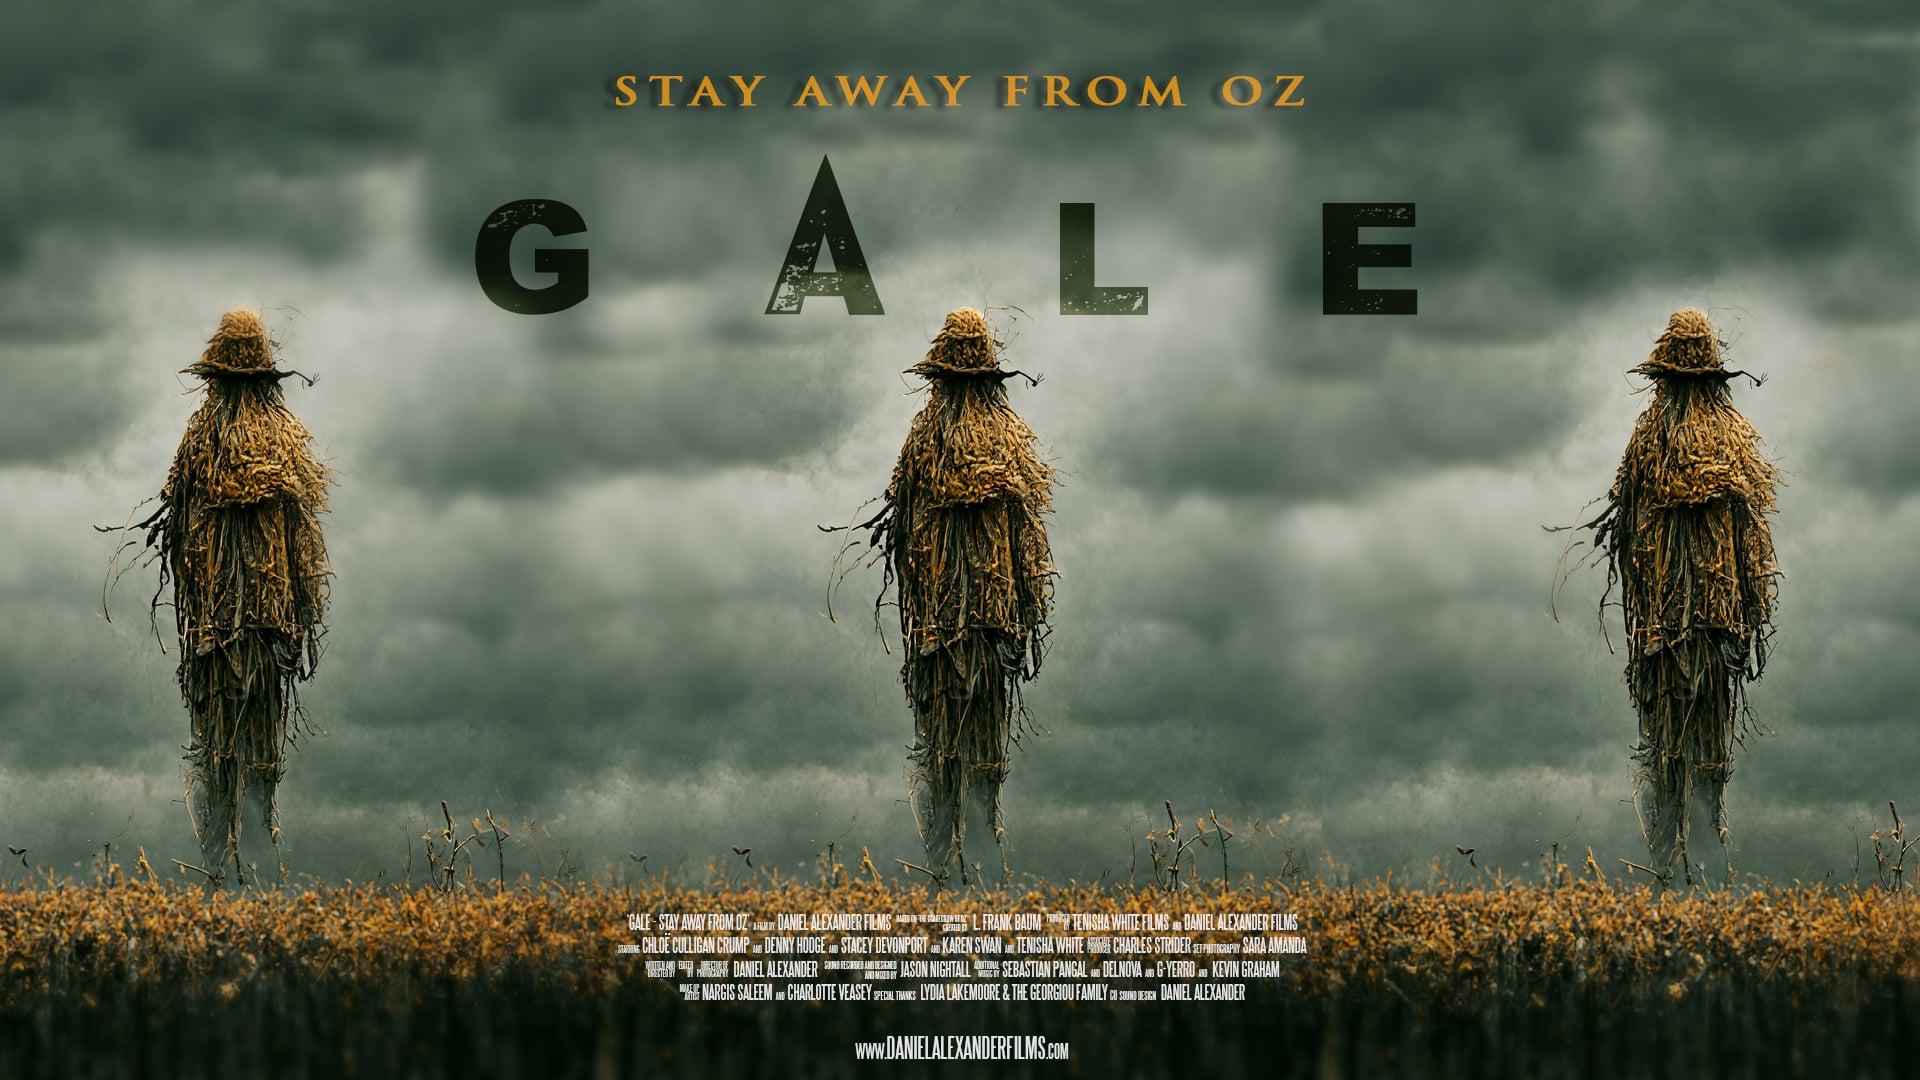 Gale stay away from oz movie release date